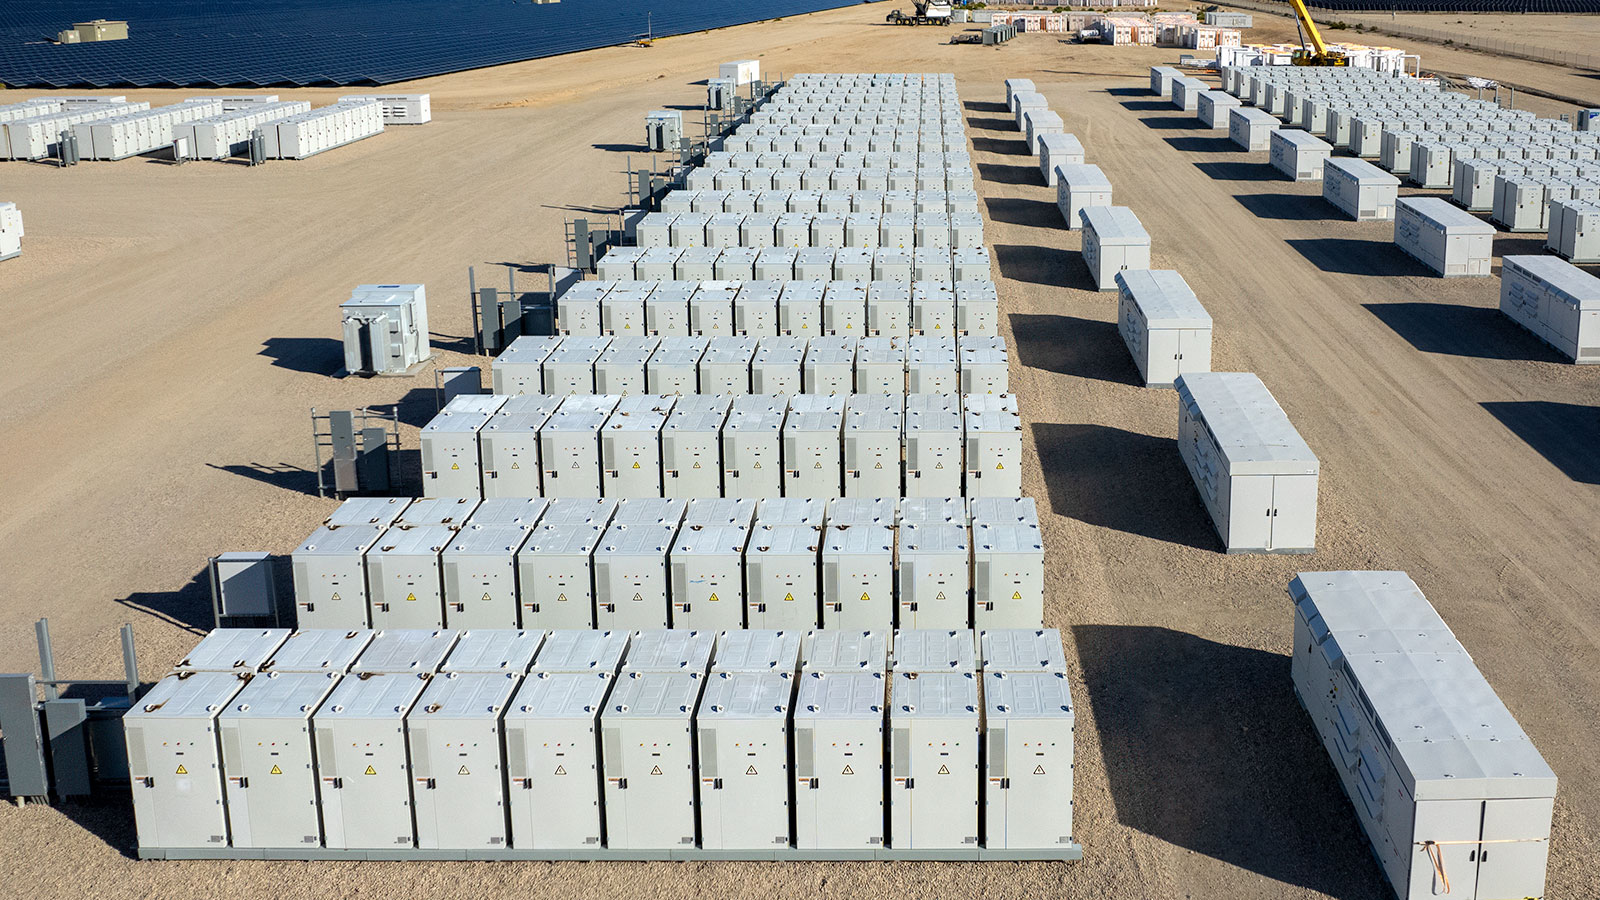 GCube offers up to $100 million in insurance capacity for energy storage projects